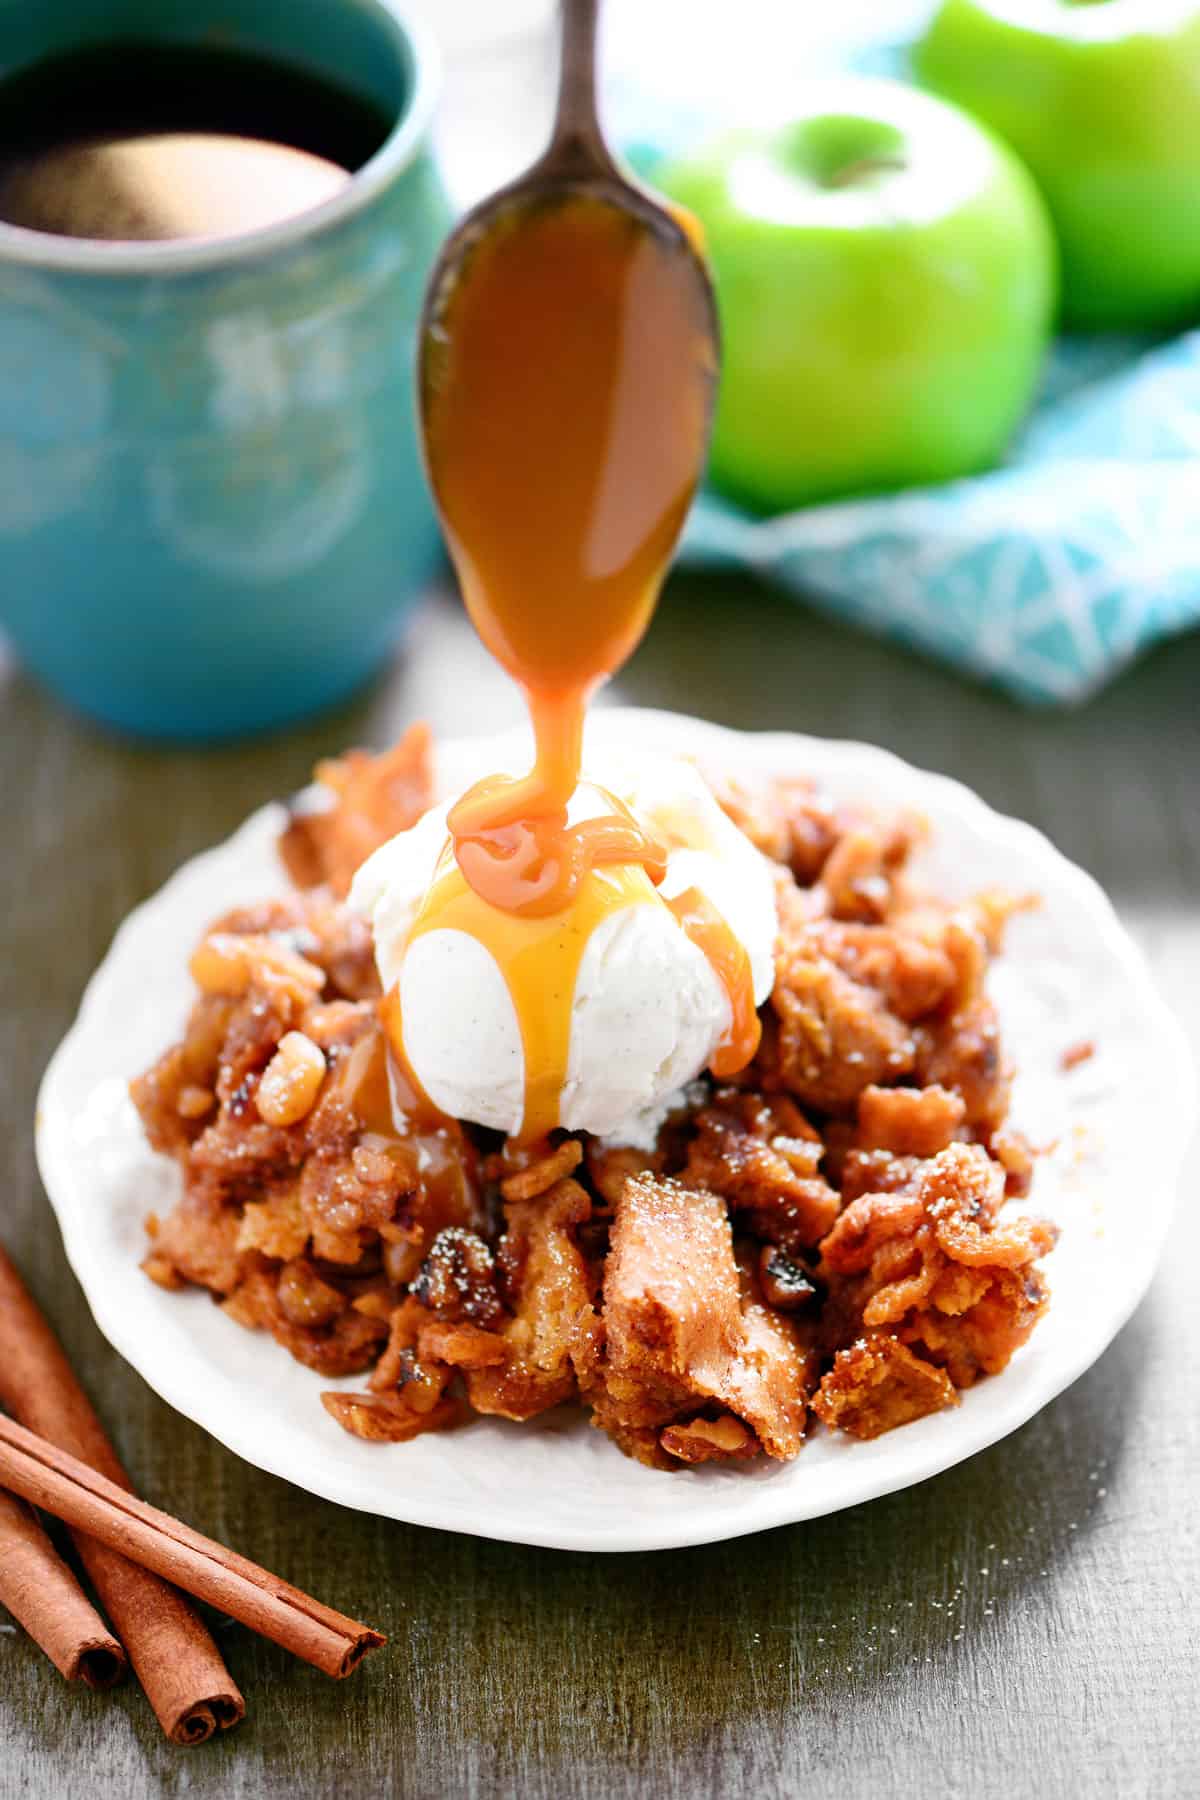 A spoon drizzles melted caramel syrup on ice cream and apple bread pudding.